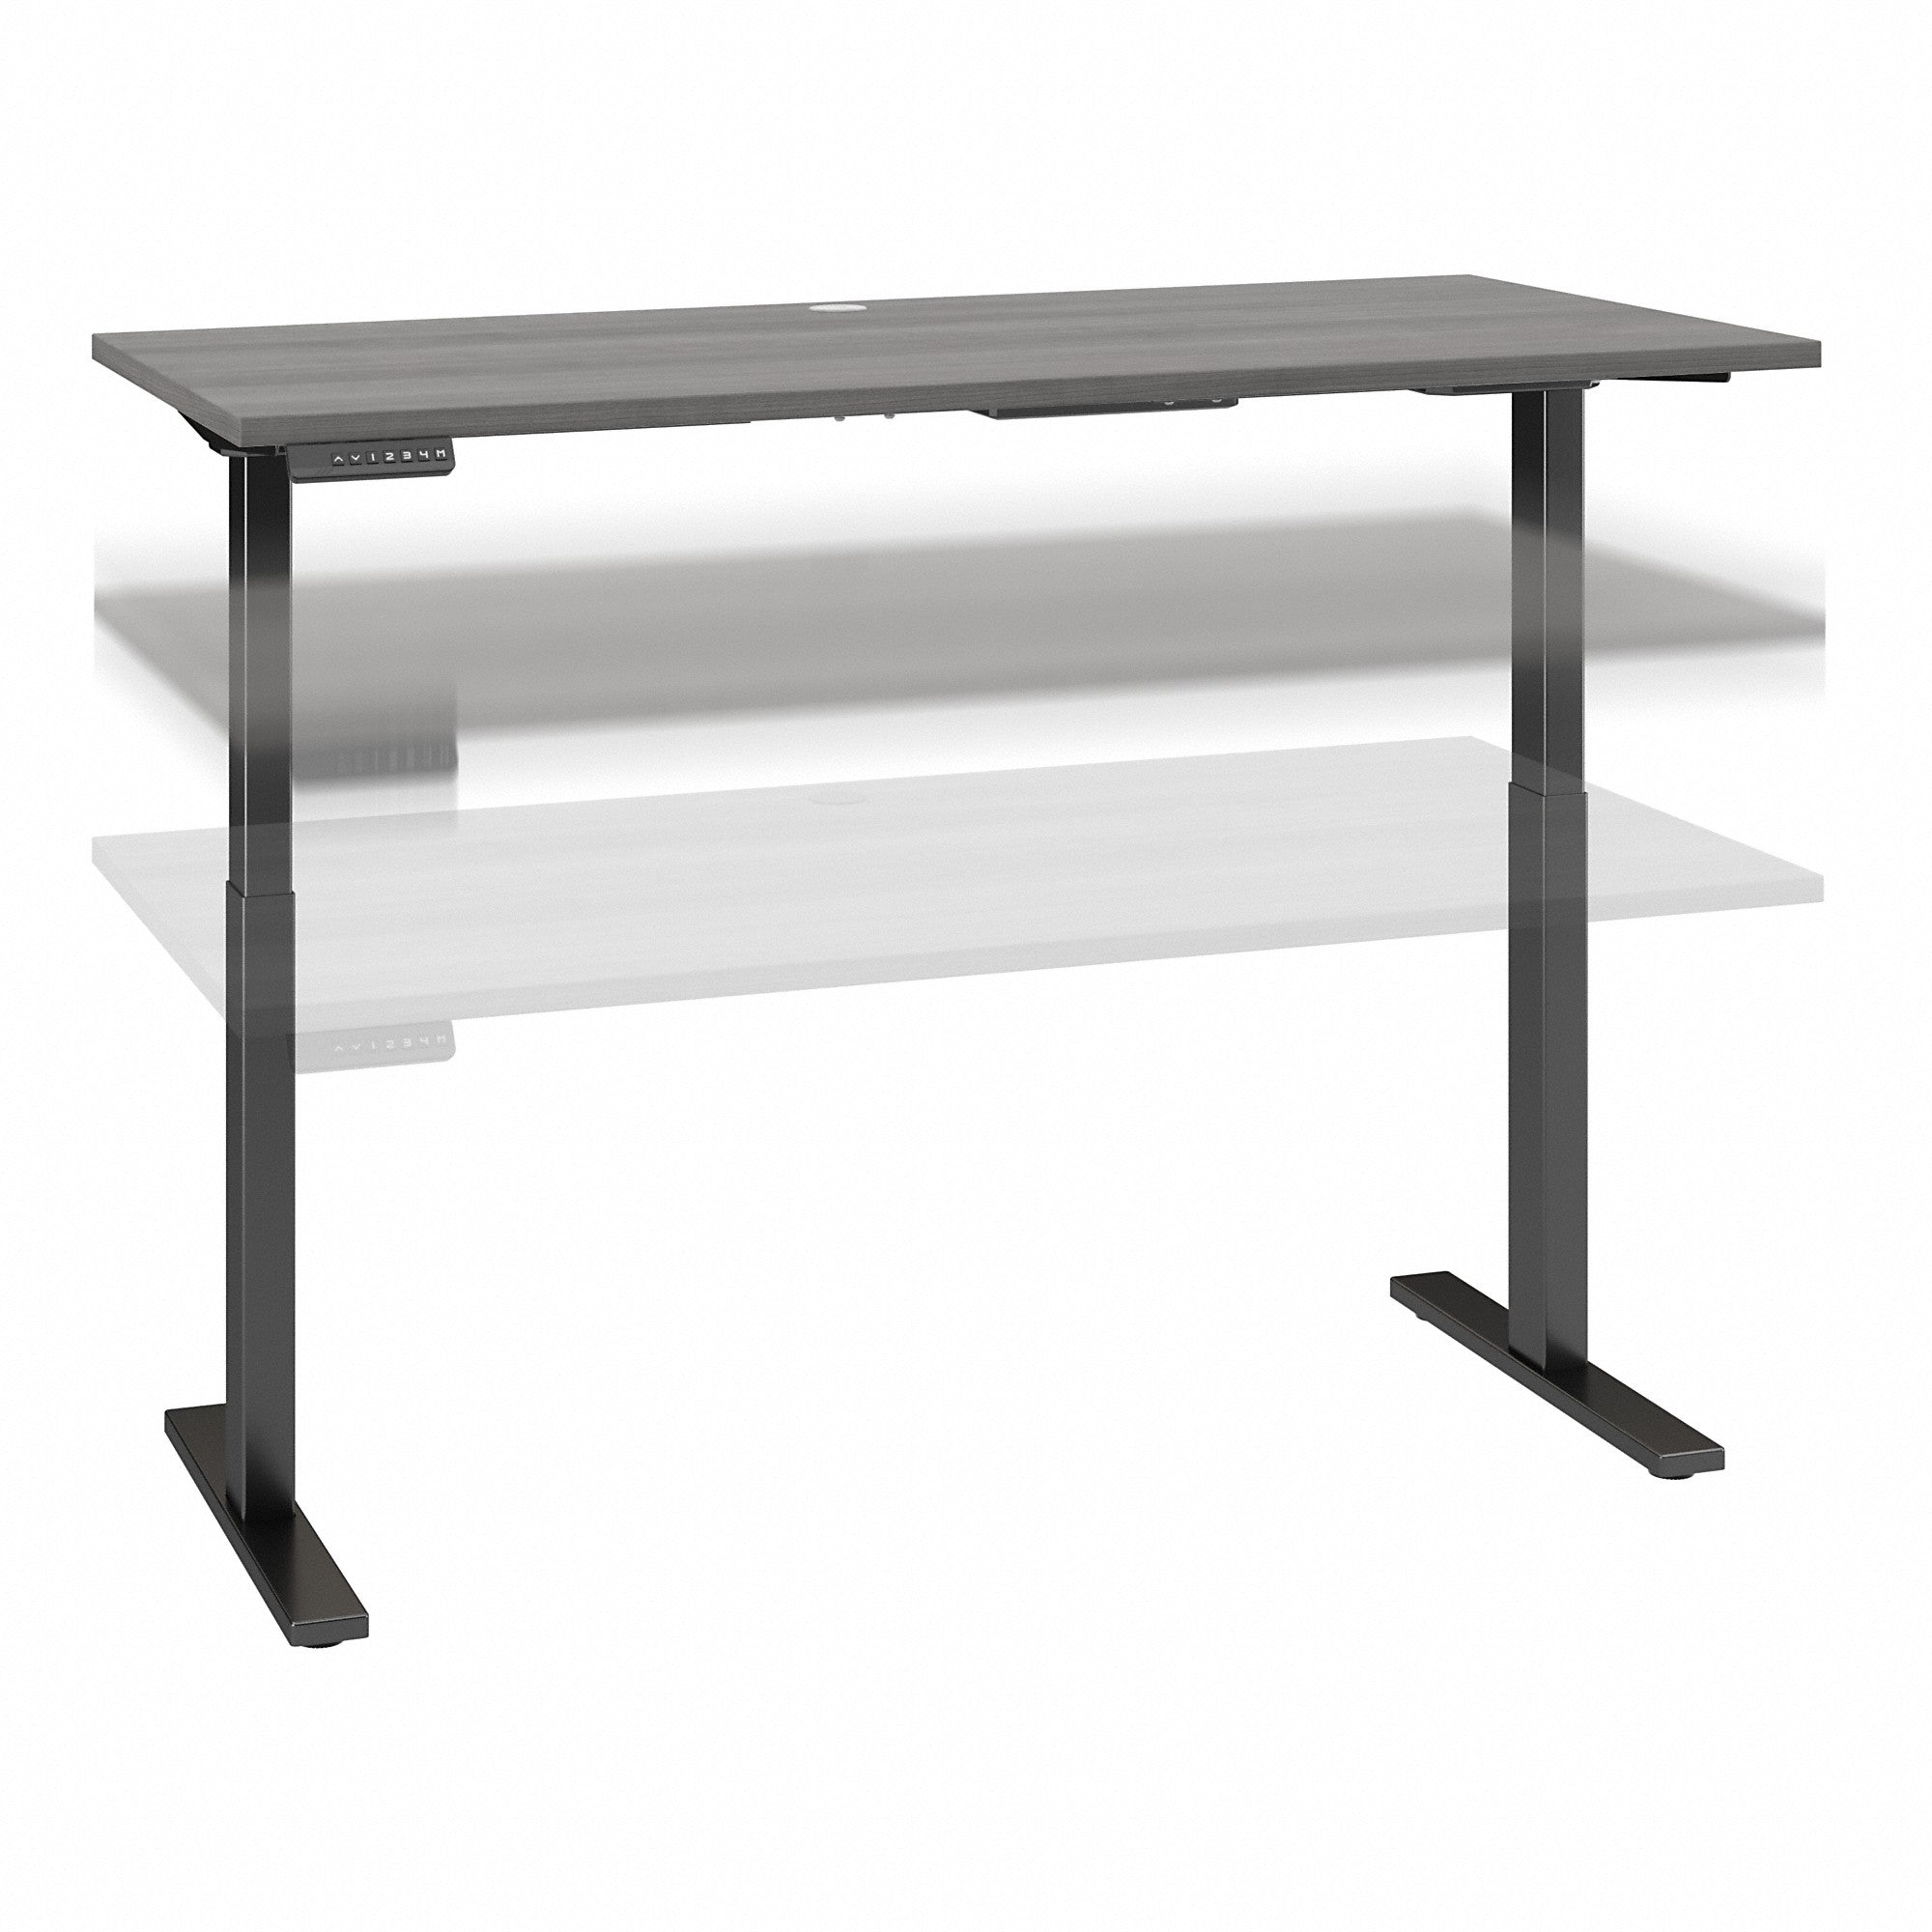 Move 60 Series by Bush Business Furniture 60W x 30D Electric Height Adjustable Standing Desk | Platinum Gray/Black Powder Coat